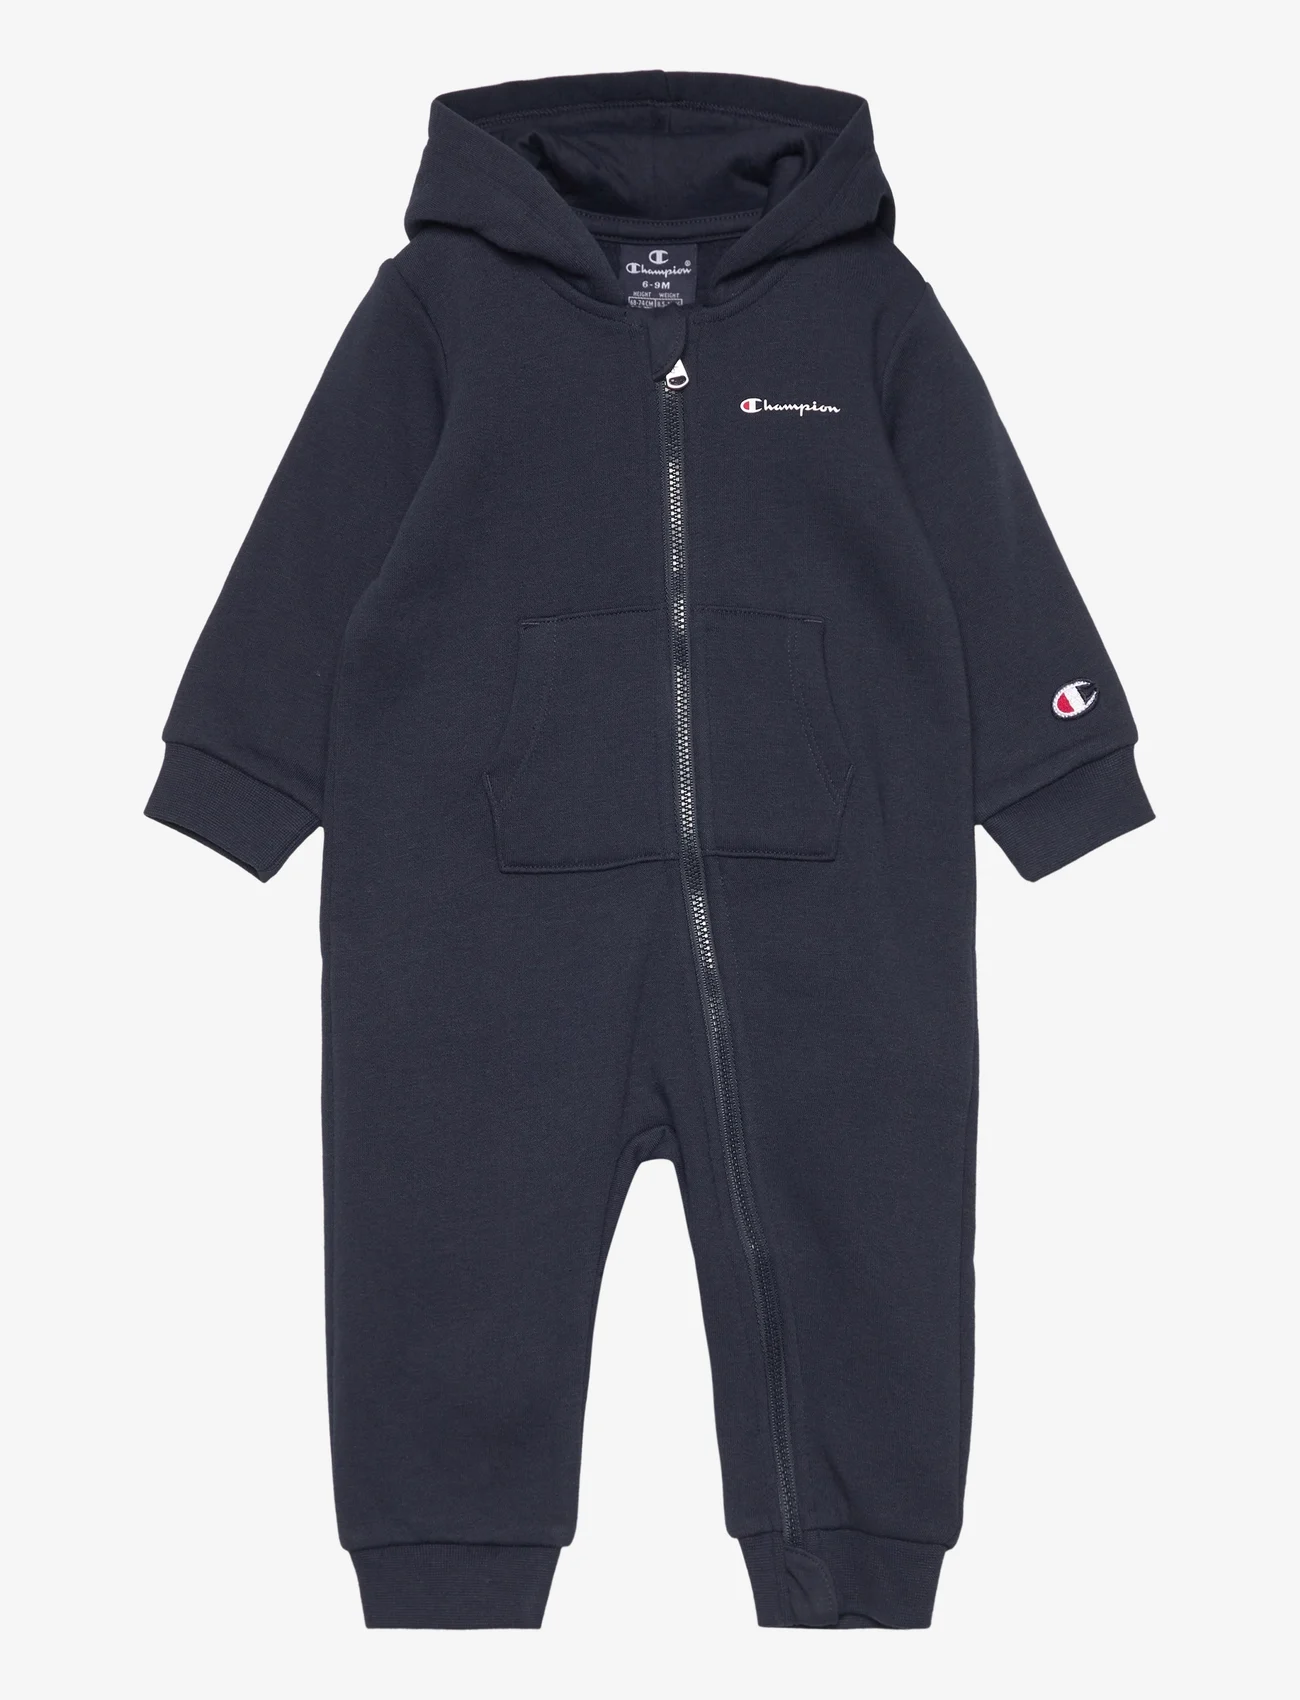 Champion - Hooded Rompers - fleece overall - sky captain - 0